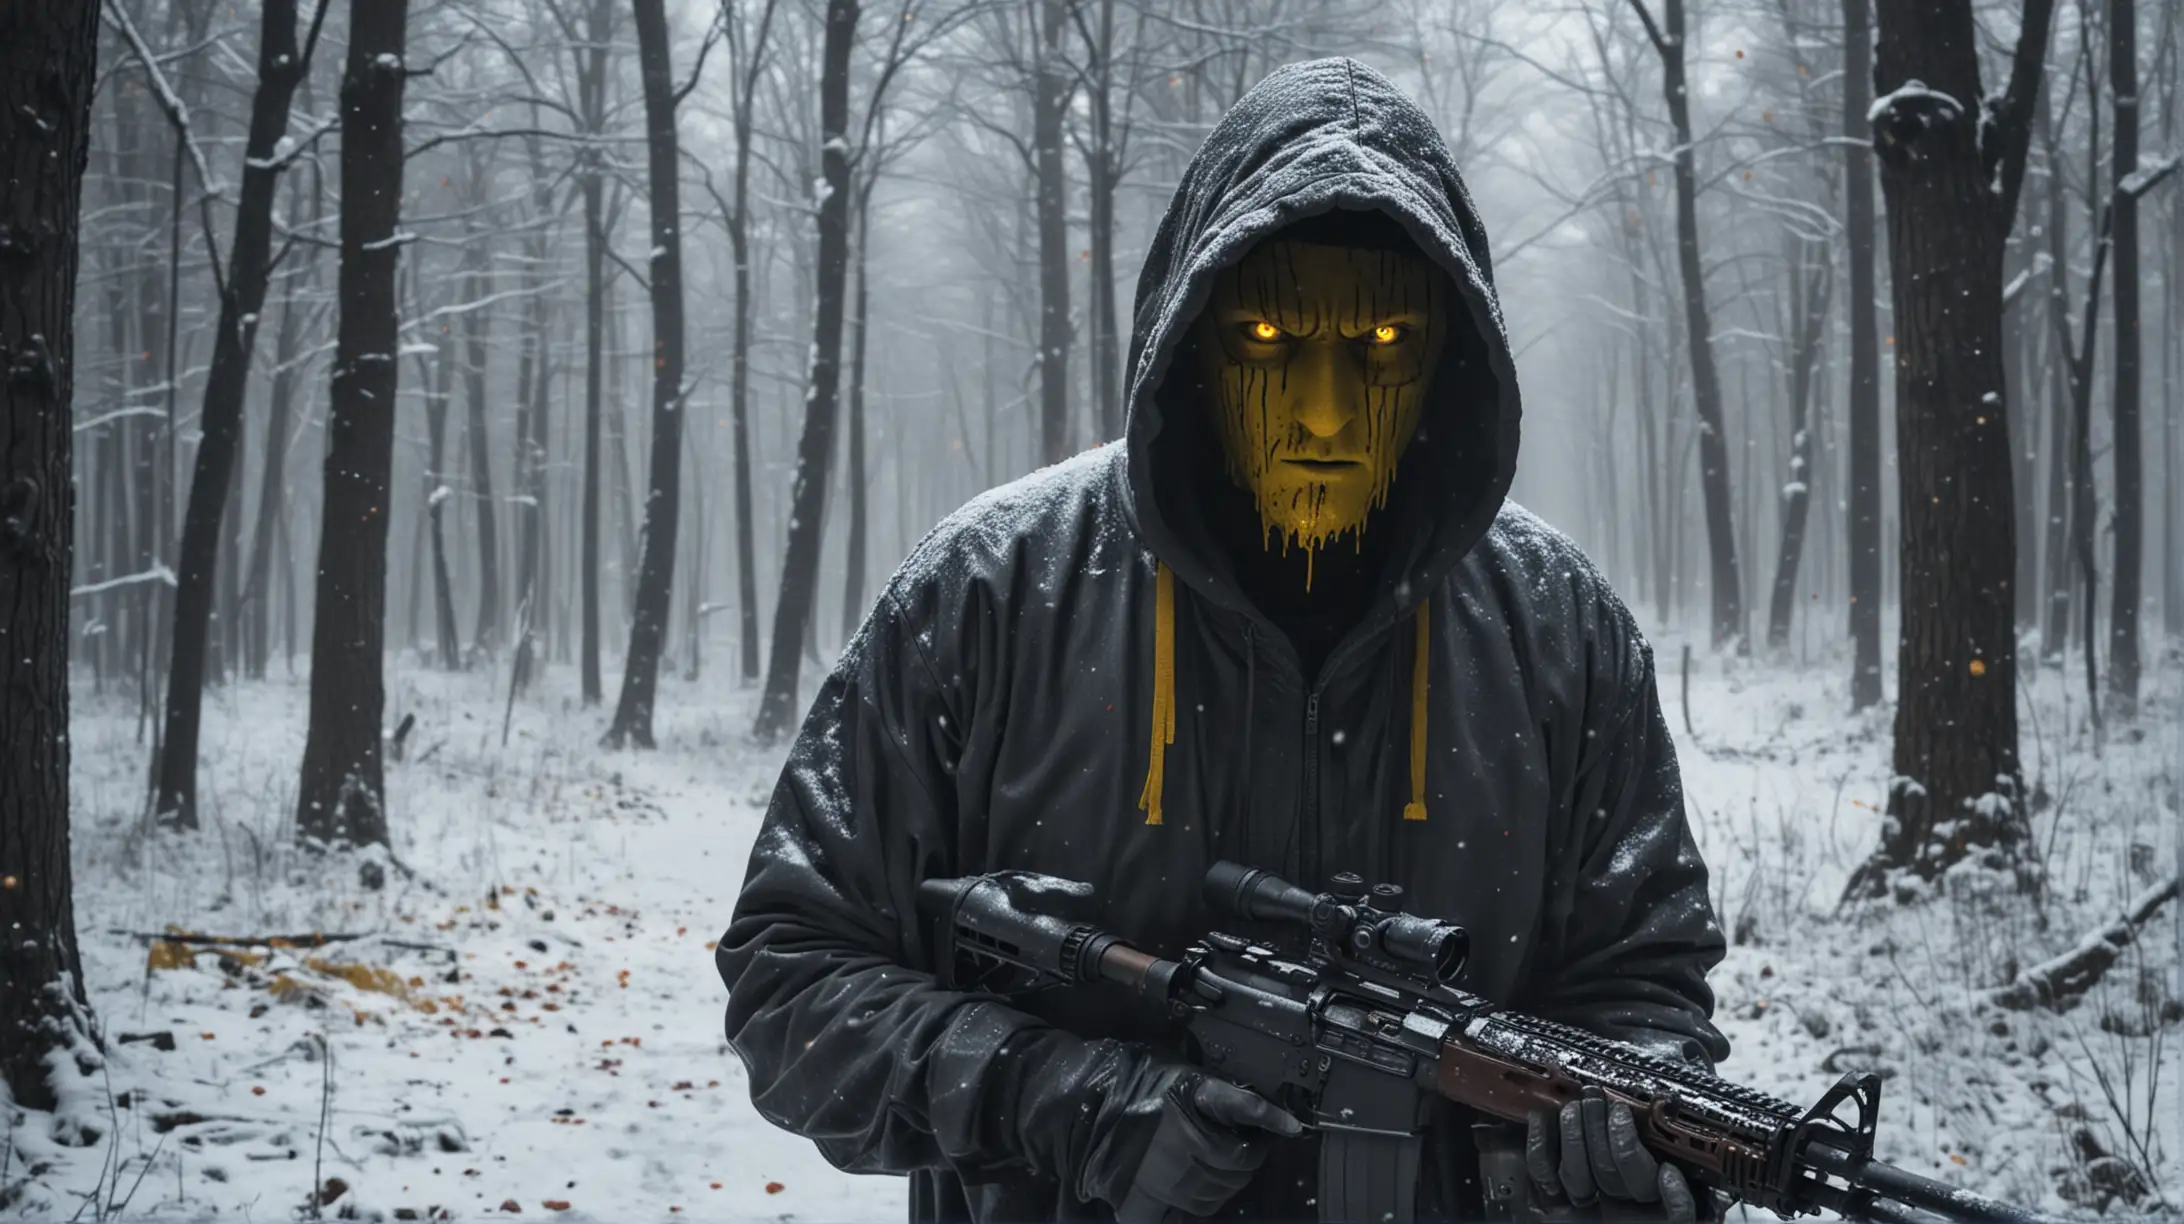 A guys with a hoody on and a rifle staring into the dark woods , there is snow and blood everywhere. On the background there here is a scary creature looking with shiny yellow eyes 

Erie atmosphere 